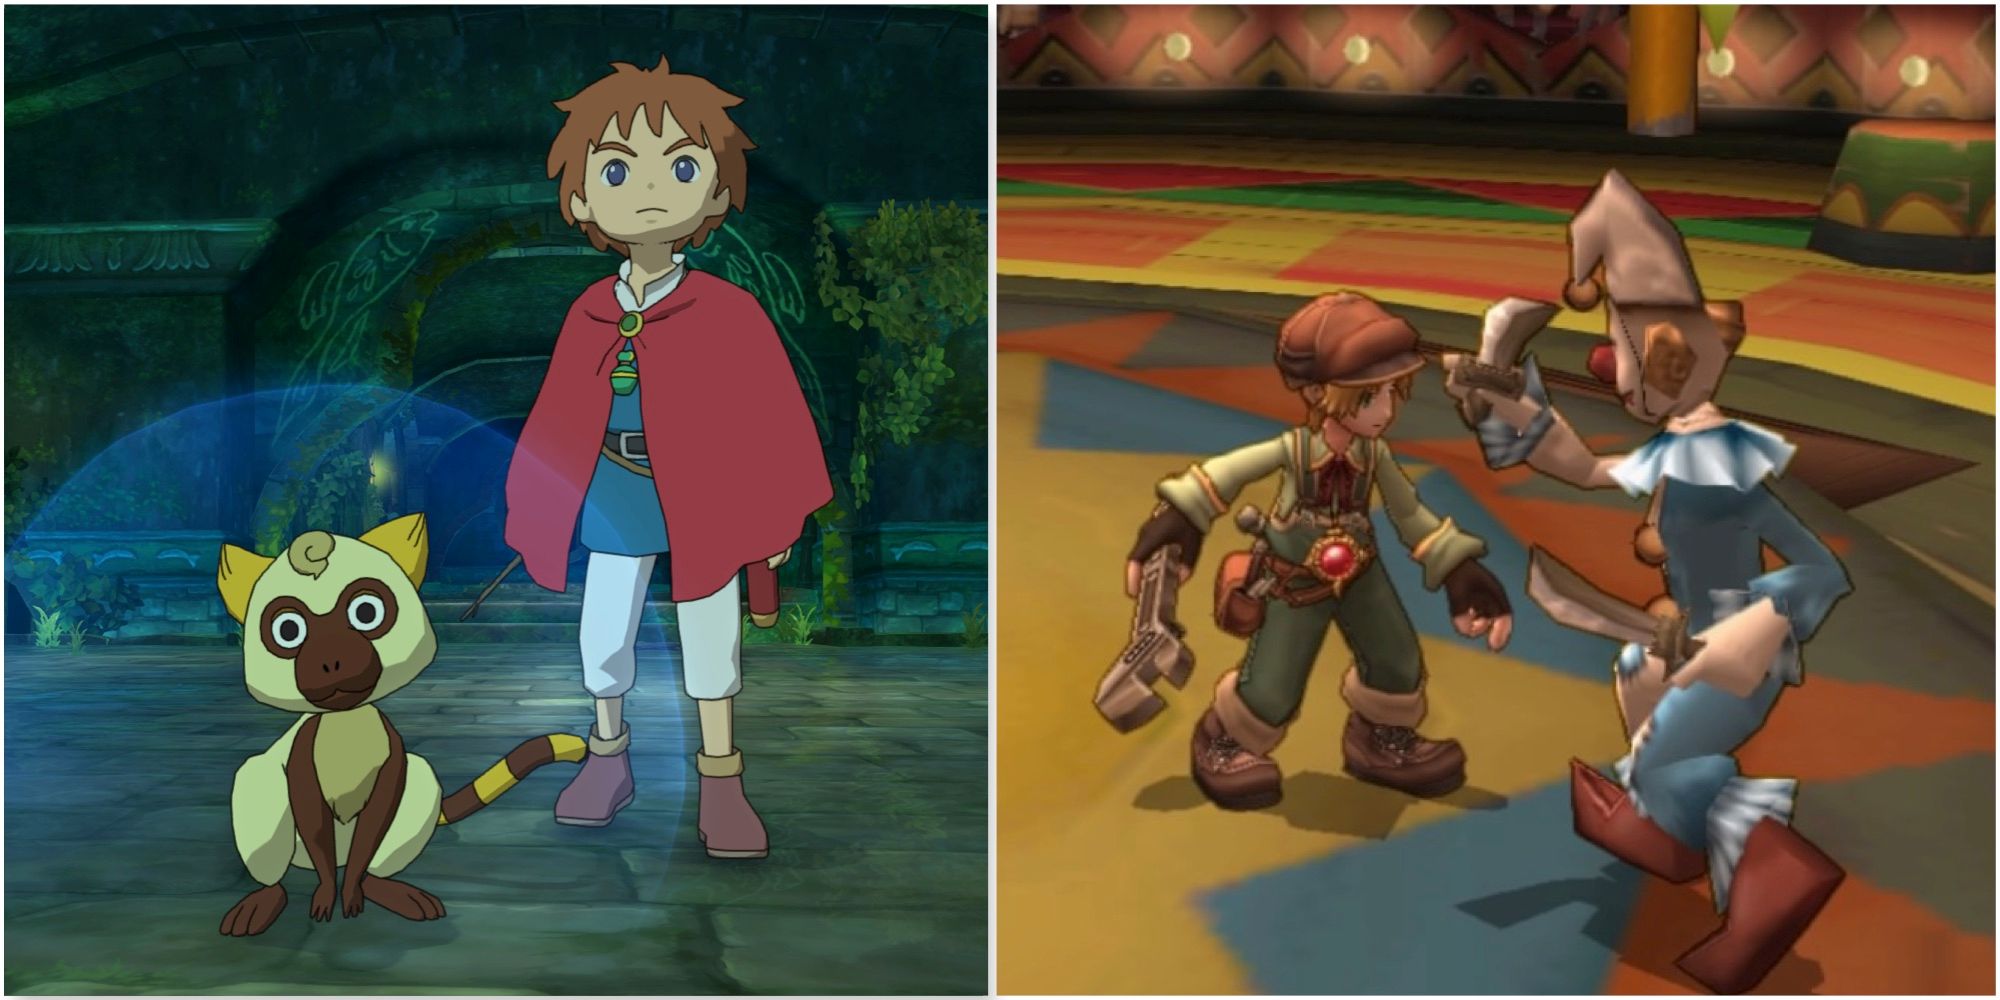 Thumbelemu and Oliver in Ni no Kuni Wrath Of The White Witch and Fighting enemies in Dark Cloud 2